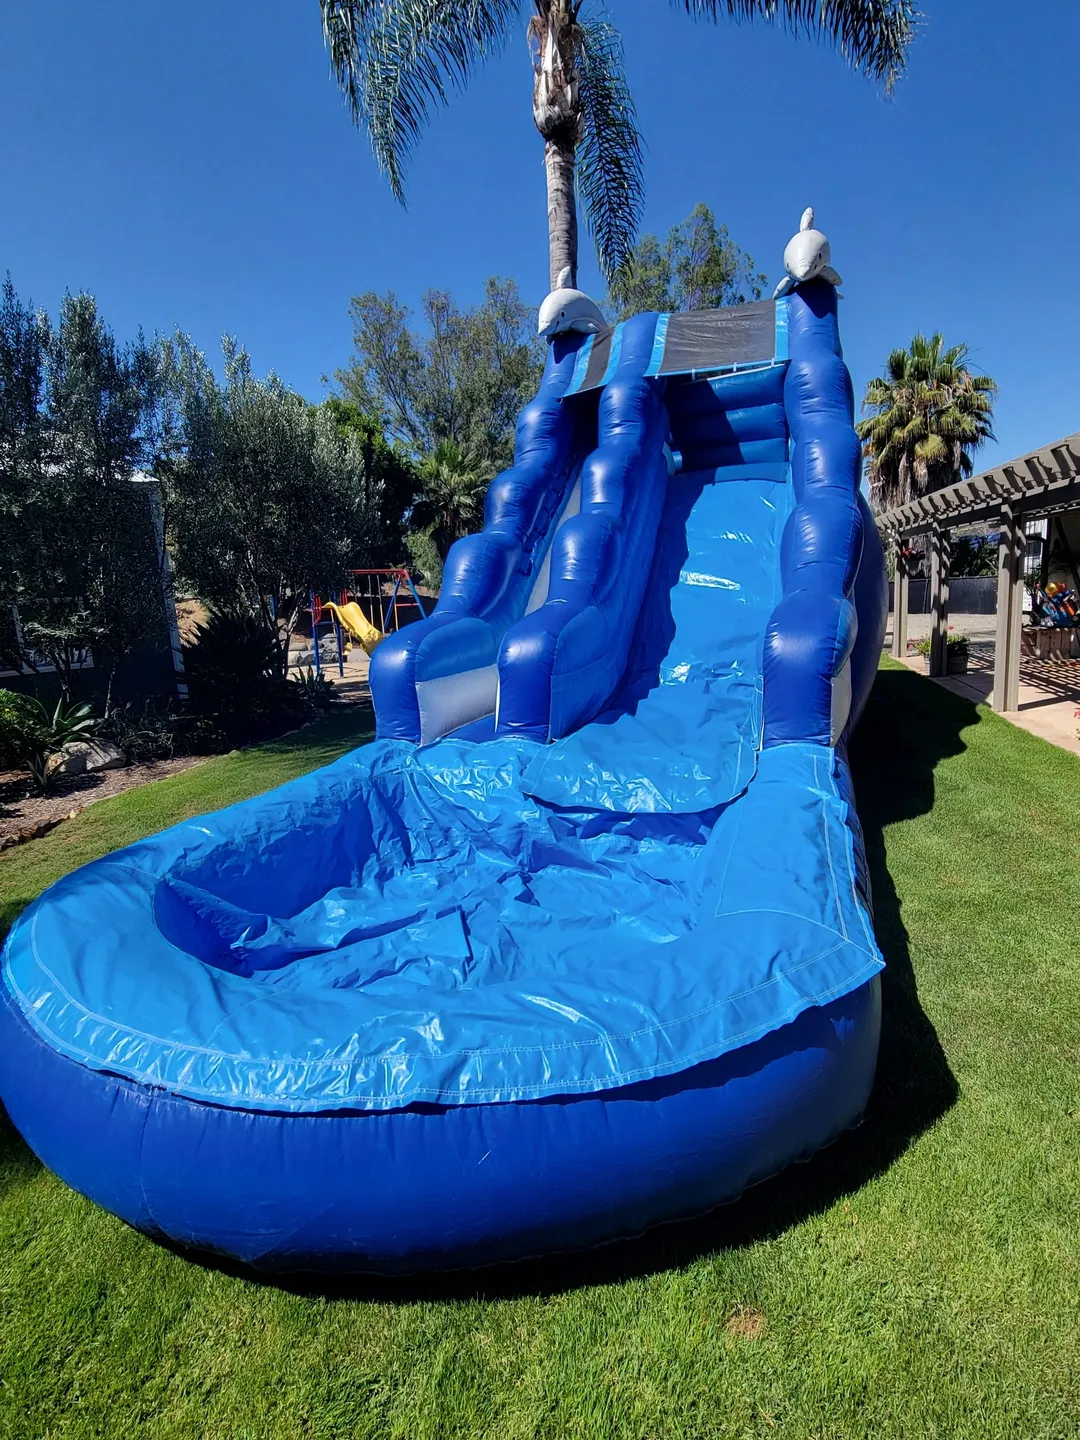 A blue inflatable water slide in the middle of a yard.